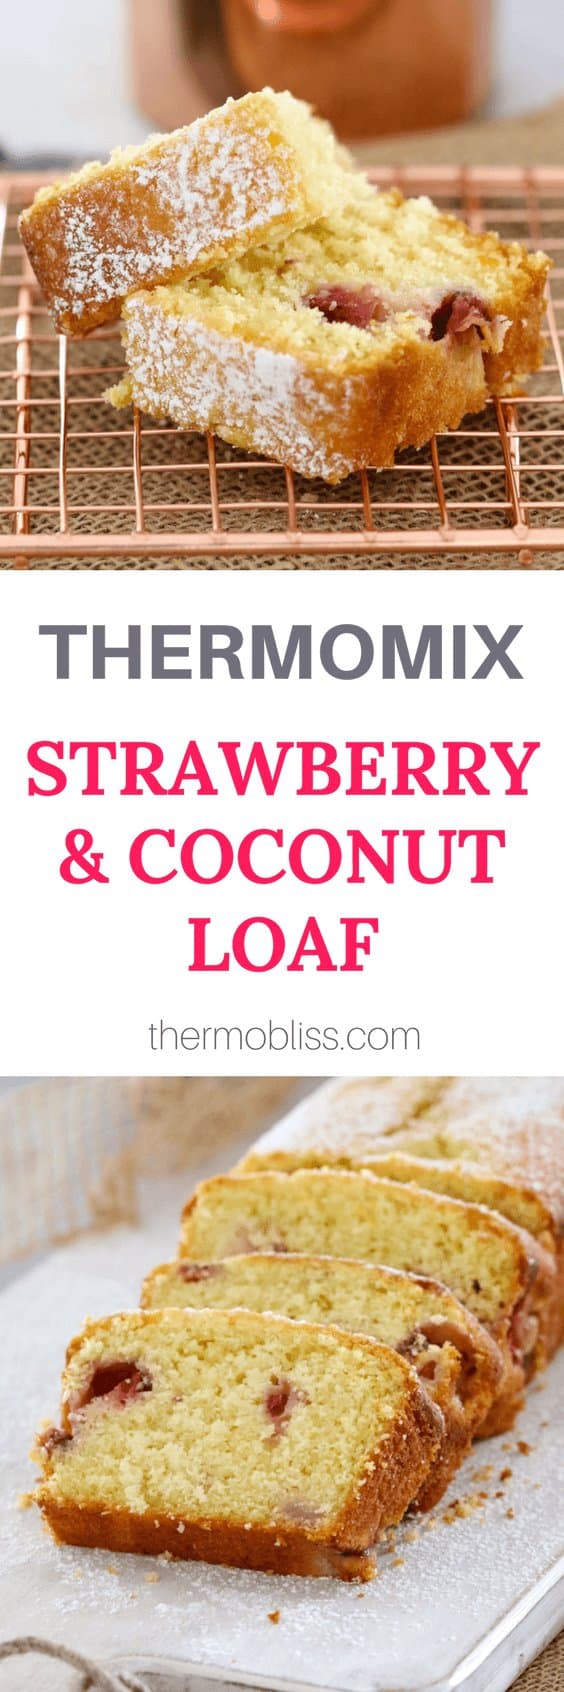 Thermomix Strawberry & Coconut Loaf